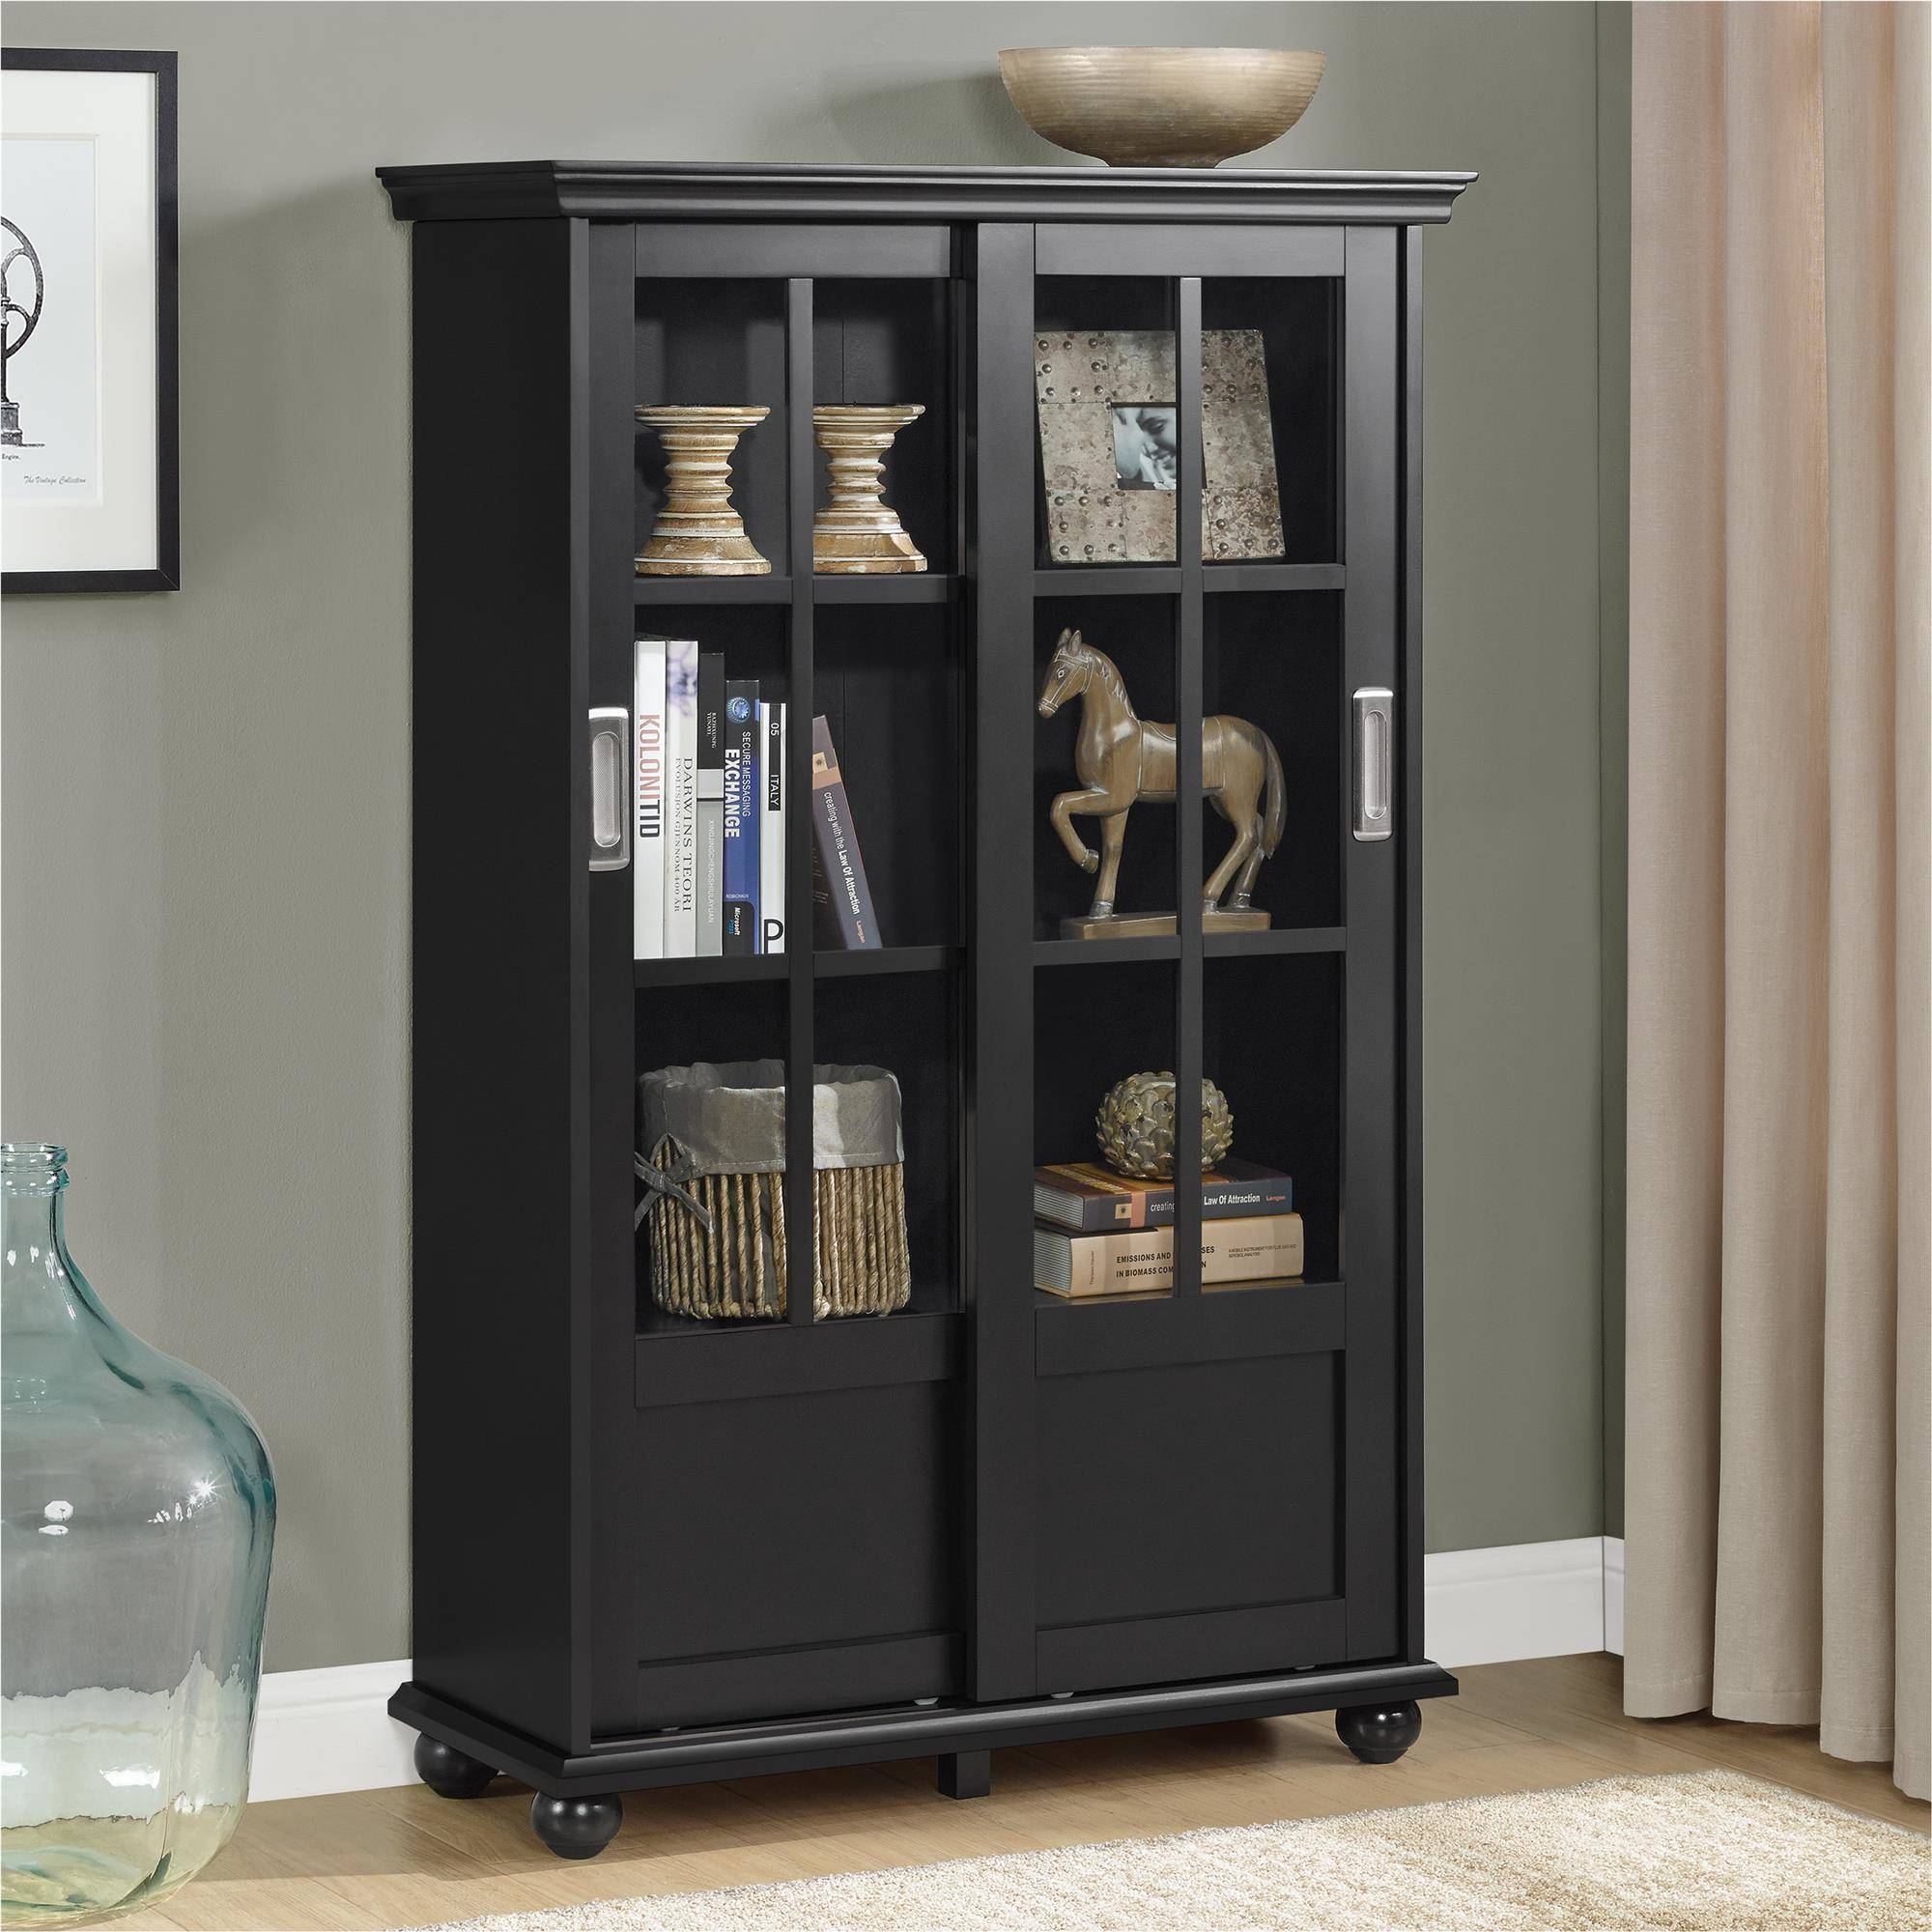 Bookcase With Glass Doors Visualhunt, Glass Fronted Bookcase Cabinet